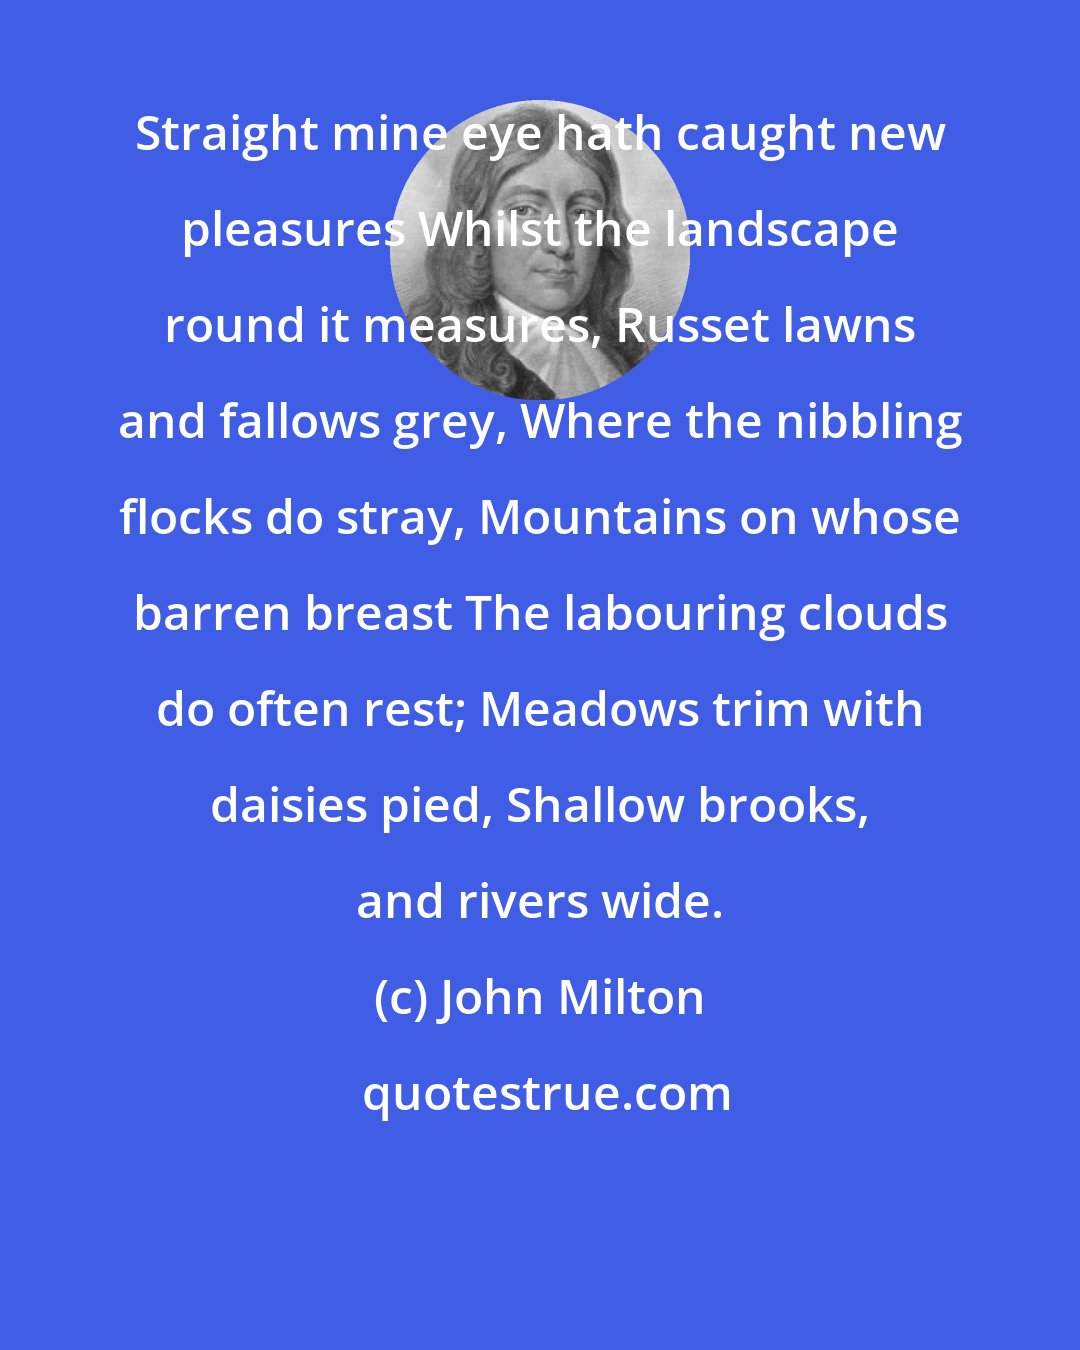 John Milton: Straight mine eye hath caught new pleasures Whilst the landscape round it measures, Russet lawns and fallows grey, Where the nibbling flocks do stray, Mountains on whose barren breast The labouring clouds do often rest; Meadows trim with daisies pied, Shallow brooks, and rivers wide.